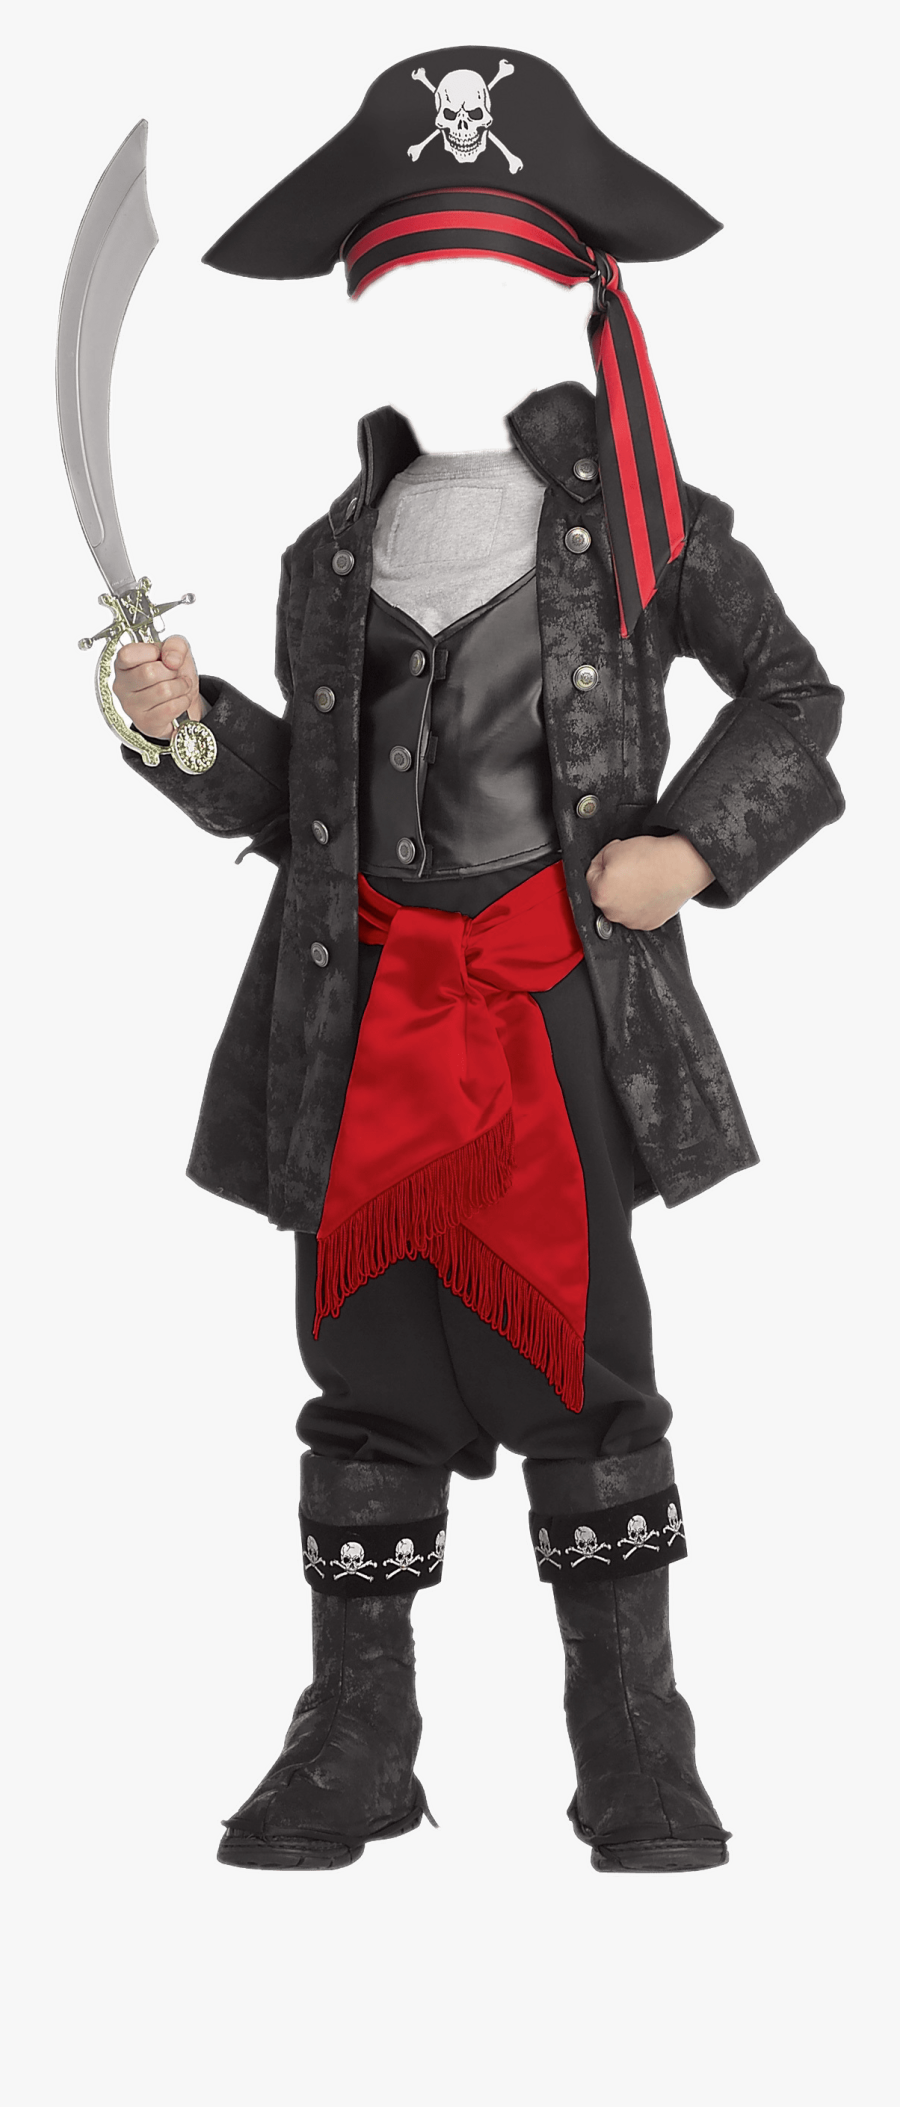 Costume Pirate - قرصان Png, Transparent Clipart